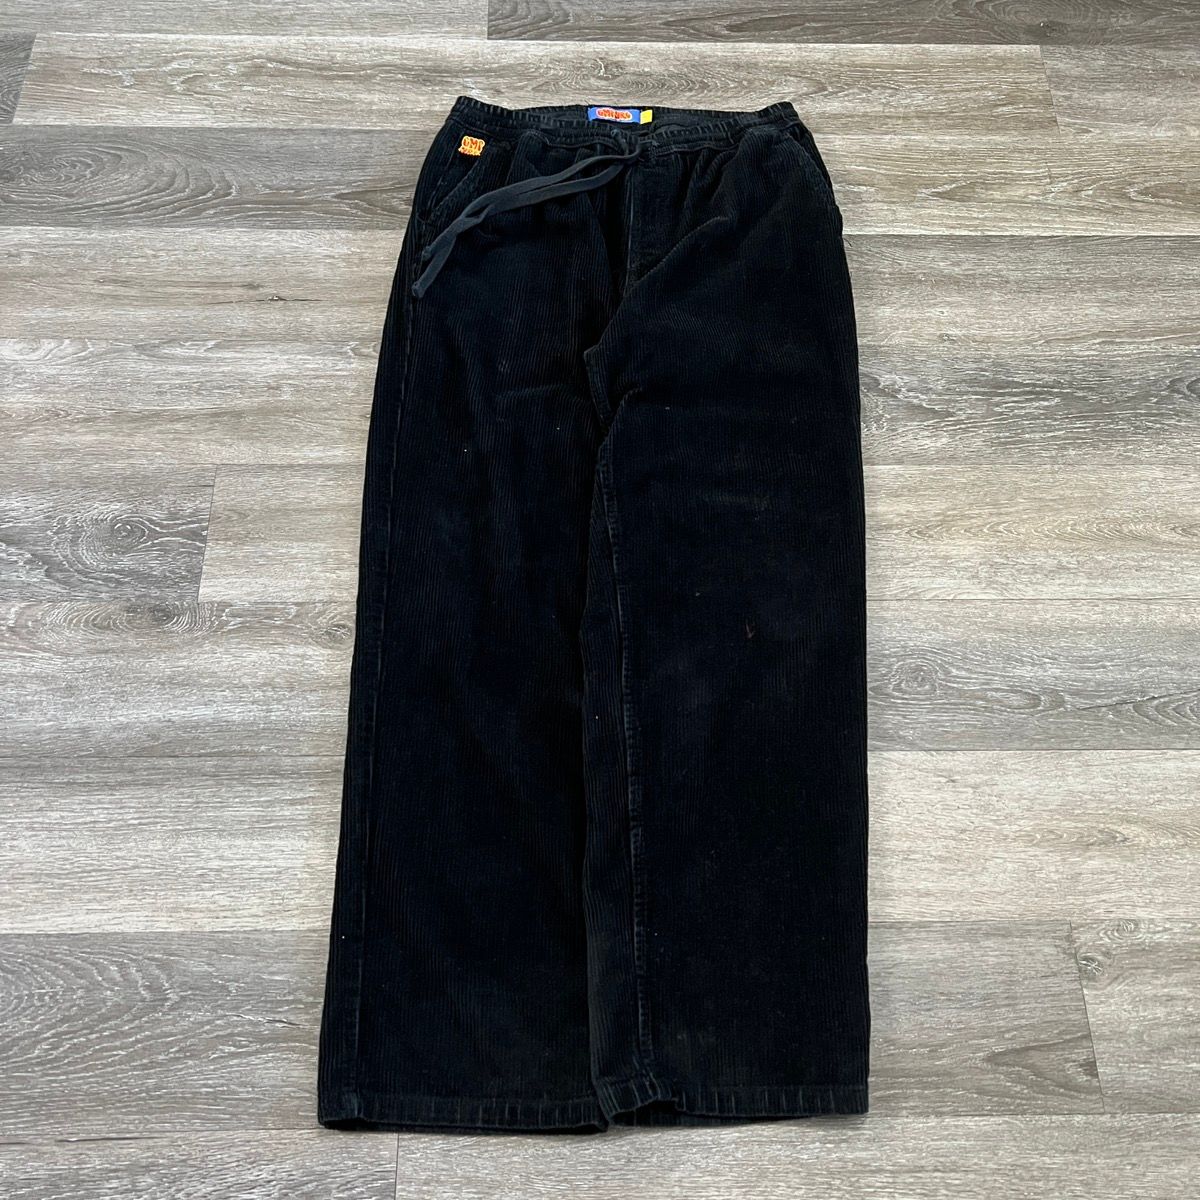 Pre-owned Empyre X Jnco Crazy Empyre Baggy Wide Leg Black Corduroy Skater Pants